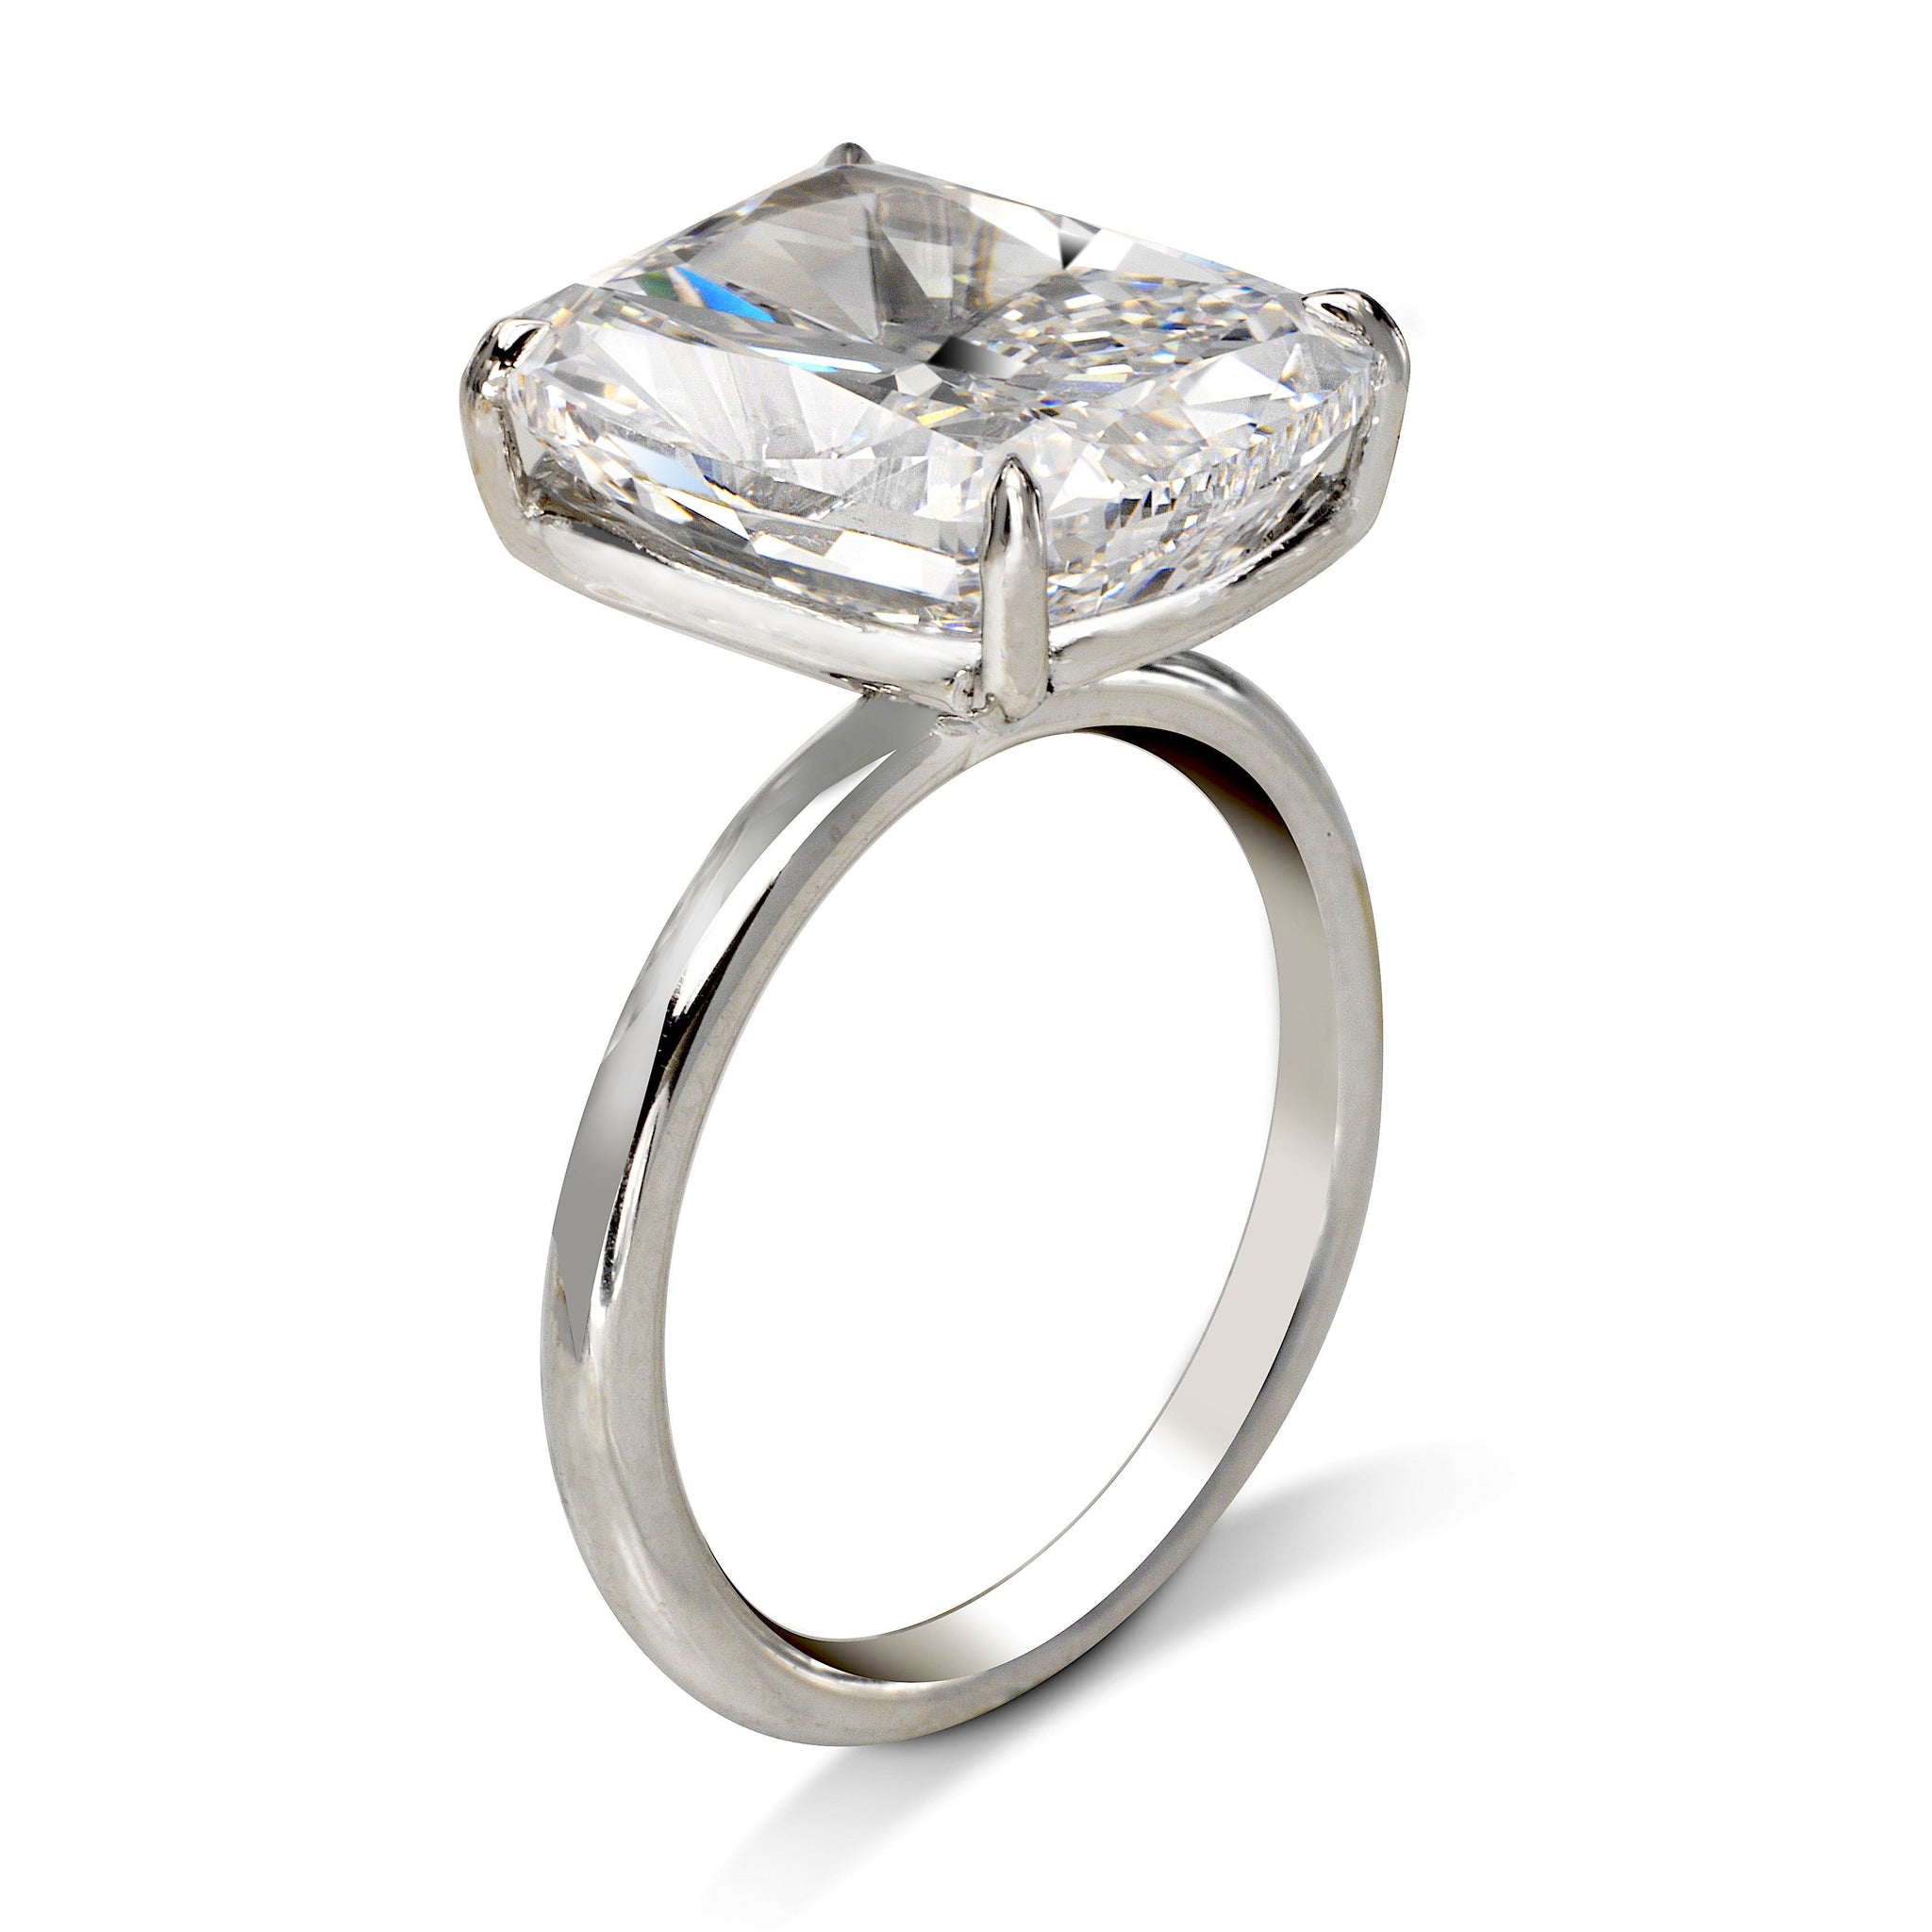 Diamond Ring Cushion Cut 10 Carat Solitaire Ring in Platinum Side View